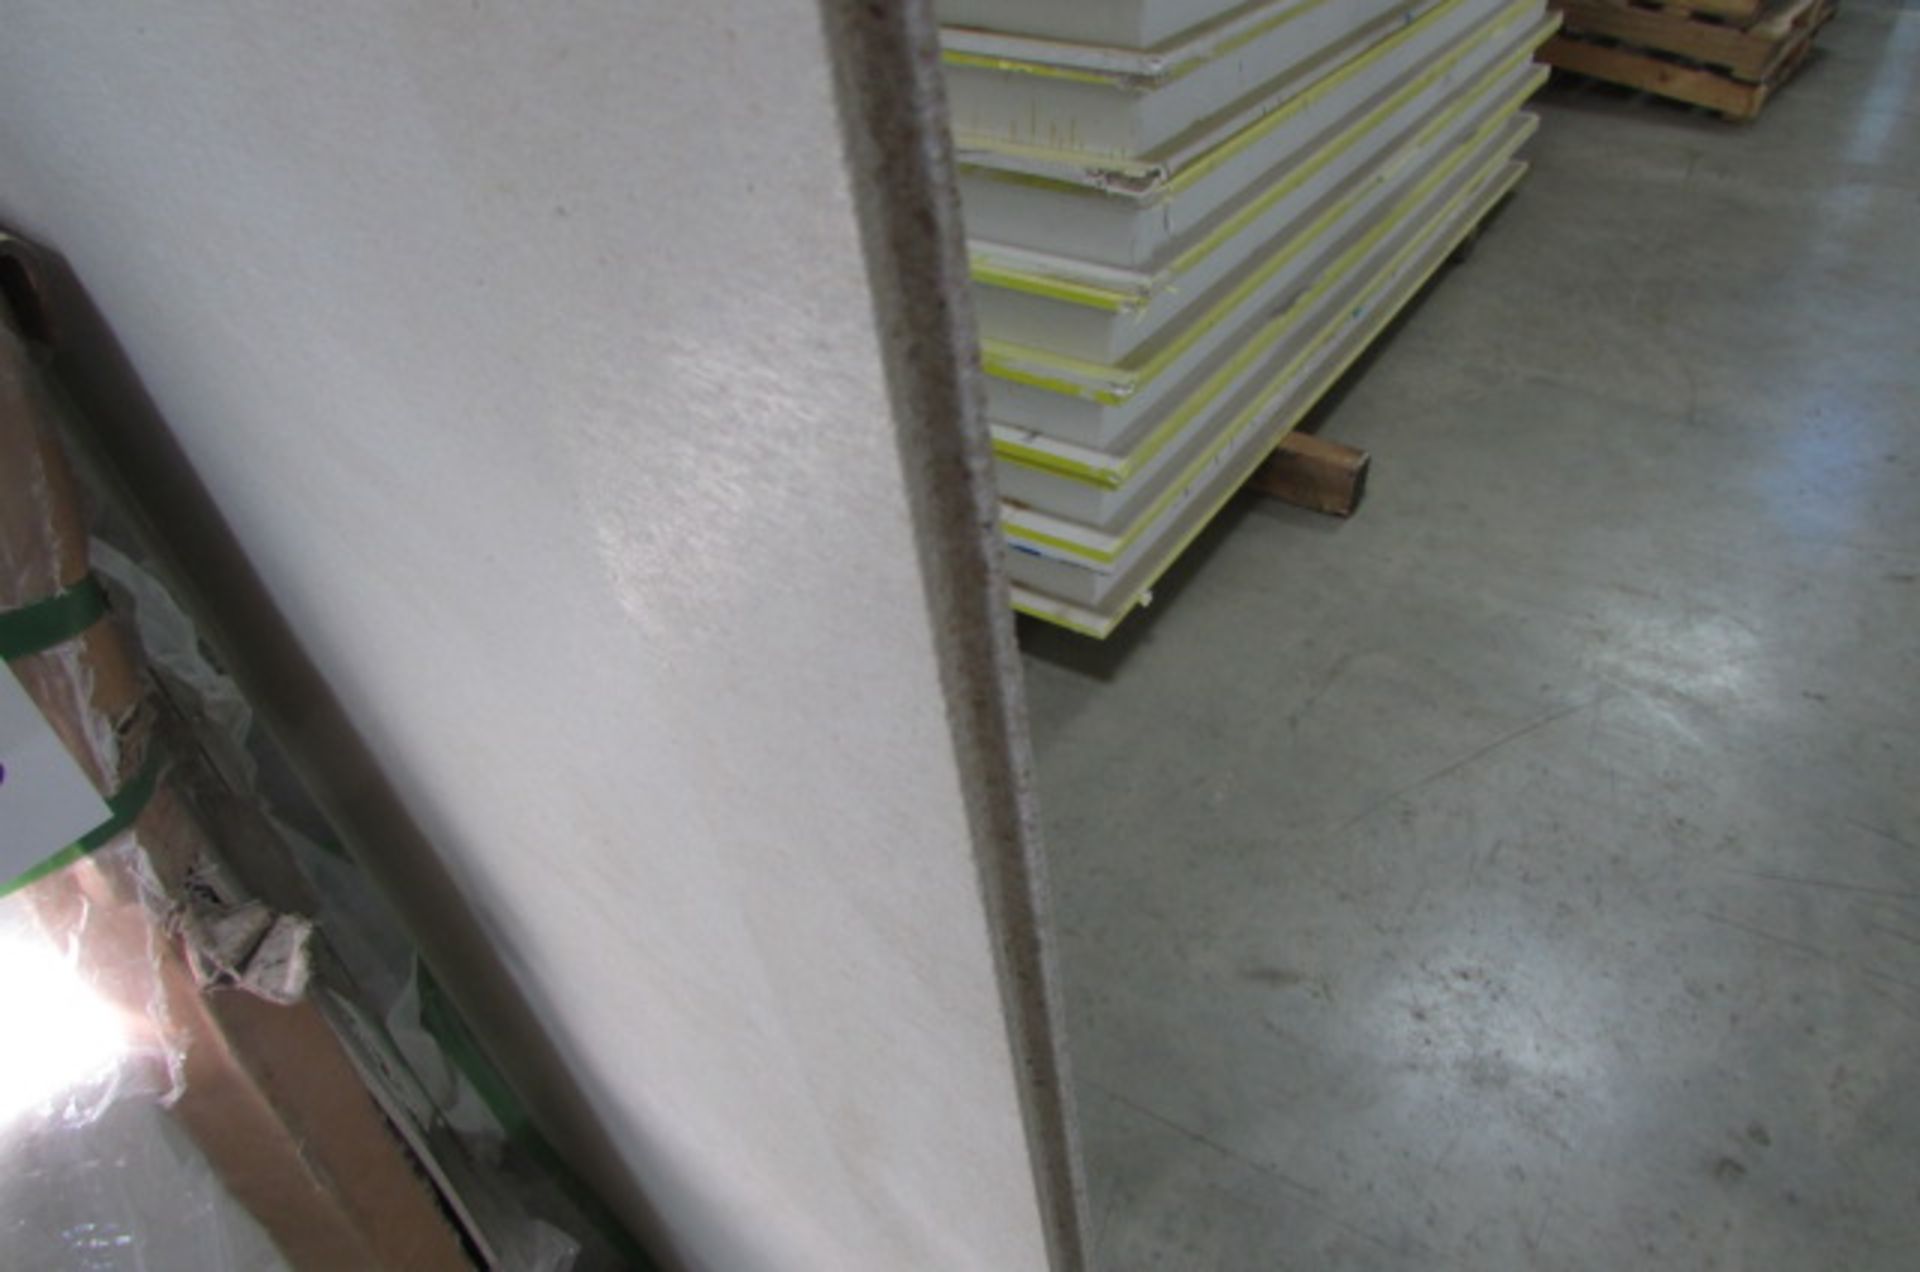 MAGNESIUM OXIDE SHEETS, 15mm - Image 2 of 2